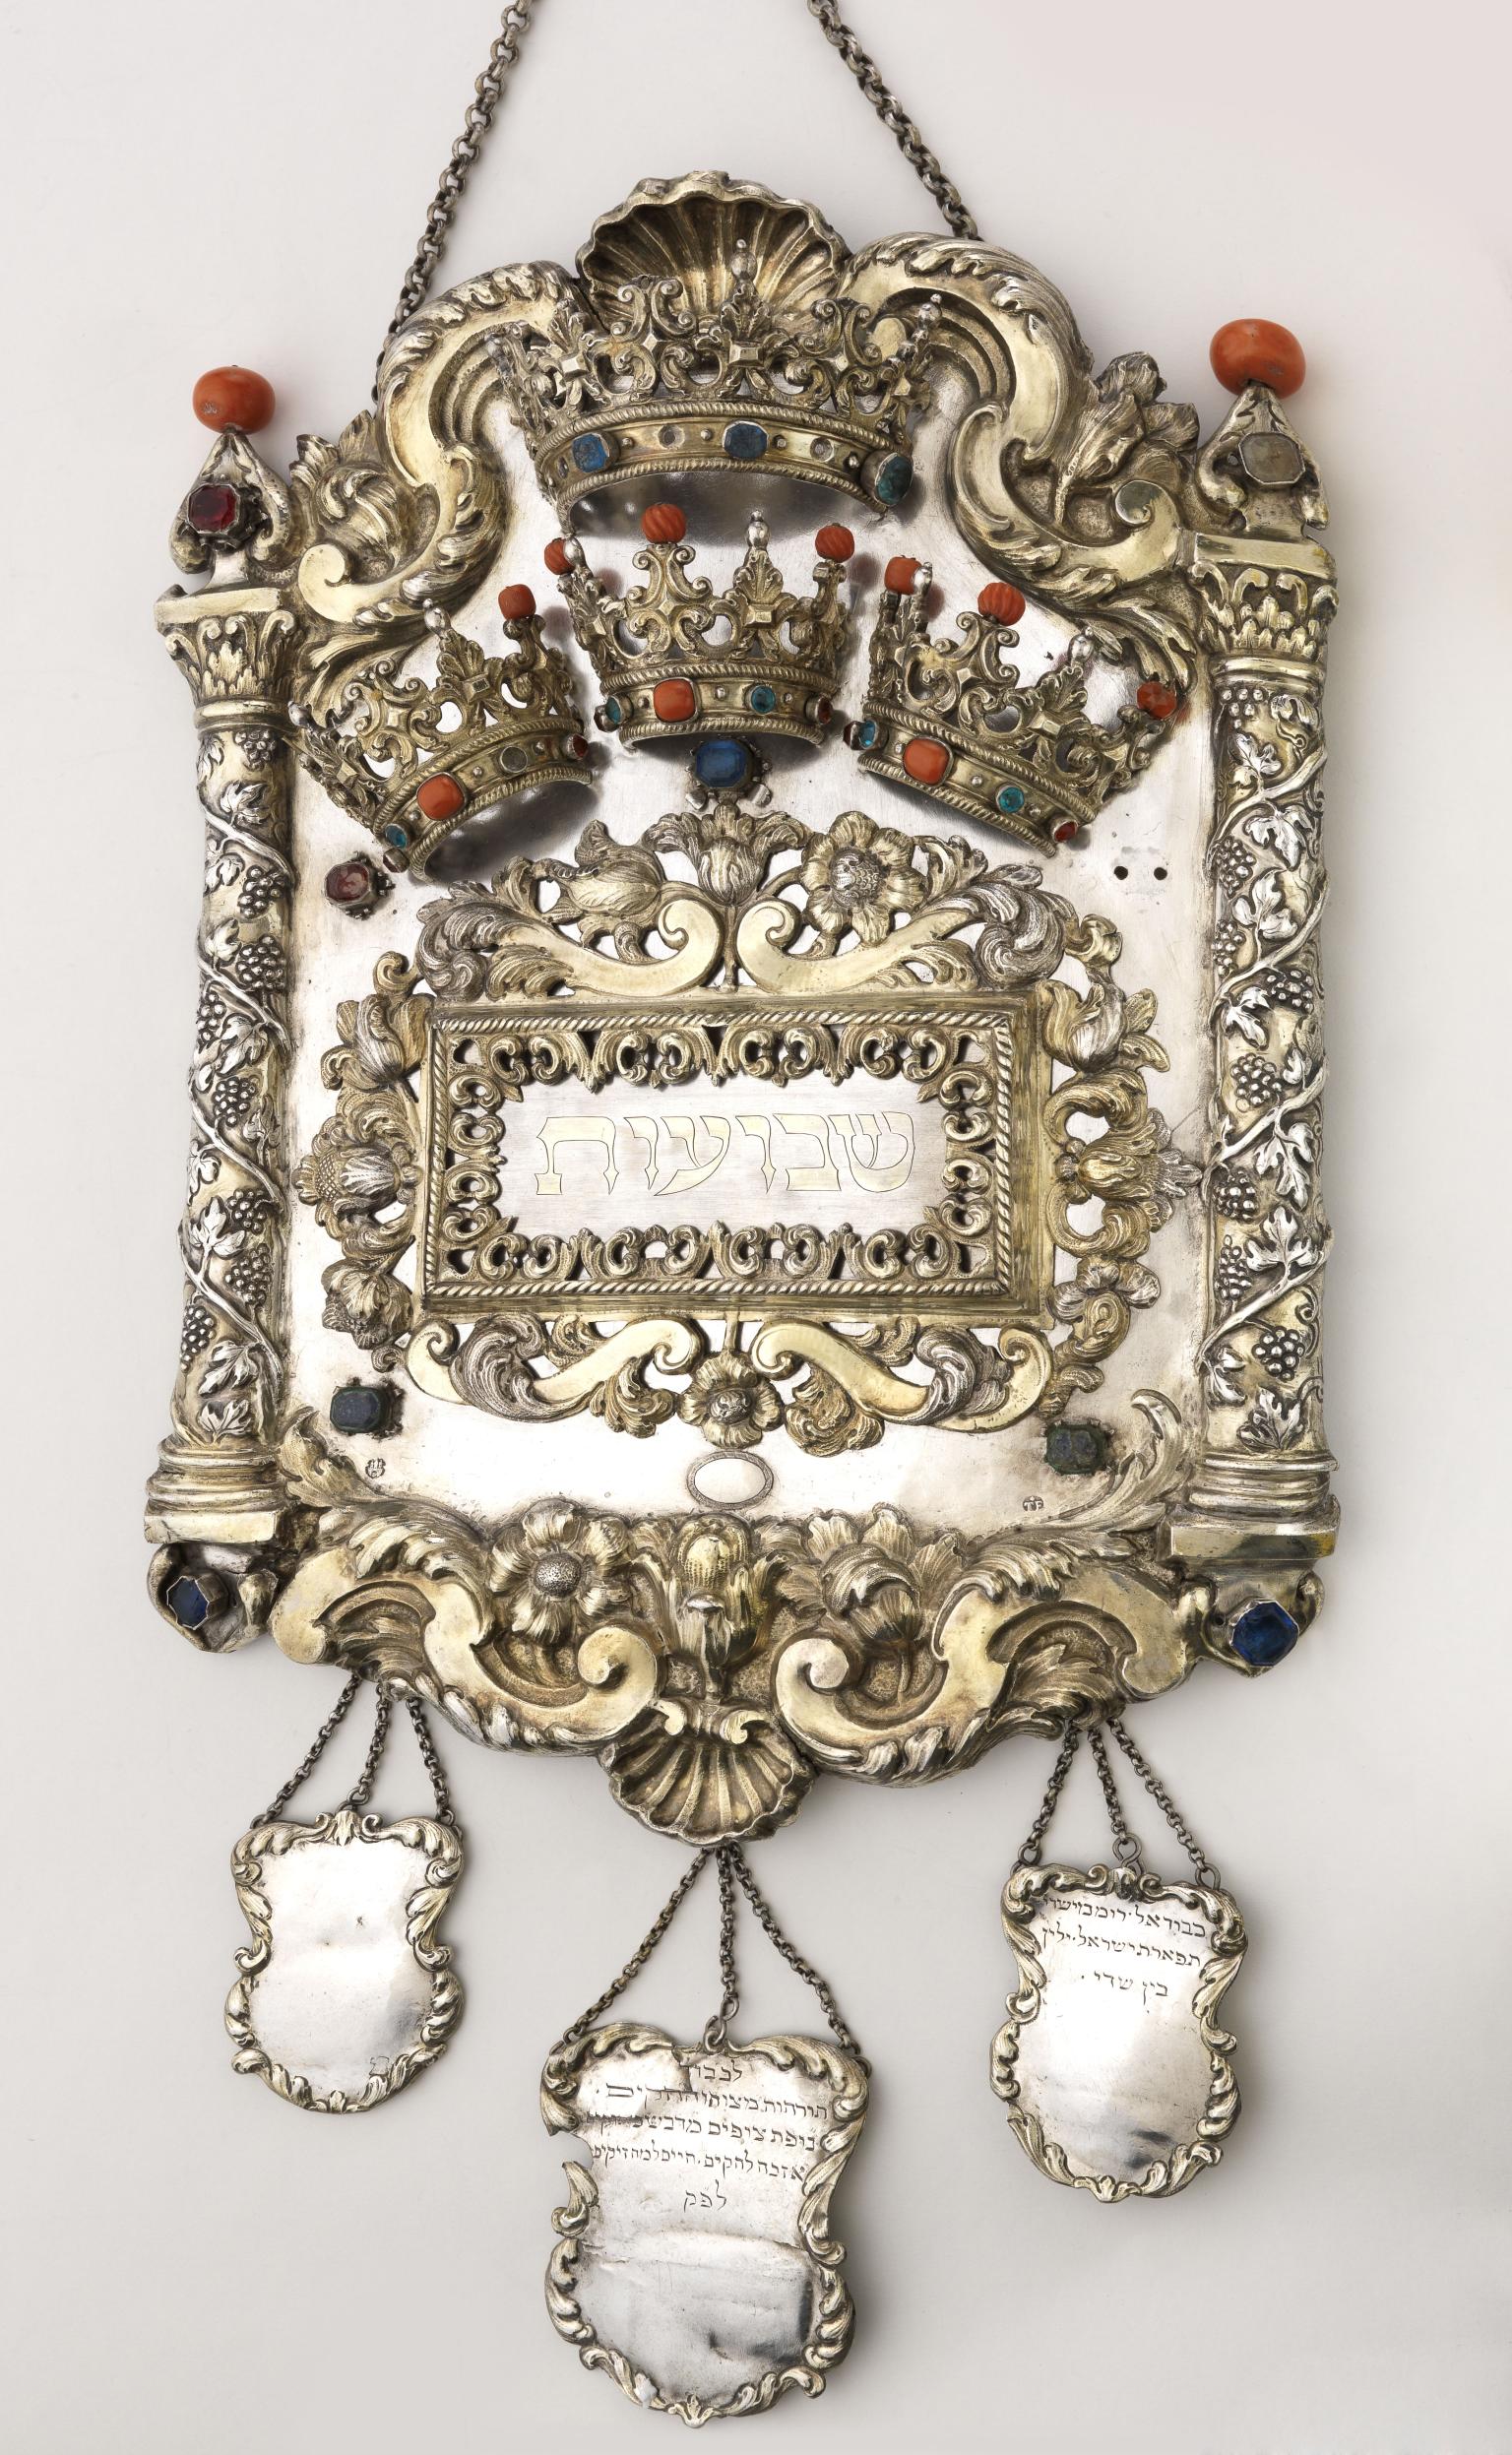 Torah shield decorated with vine-wrapped columns on either side, crowns across the top, and three smaller shields hanging from bottom. 